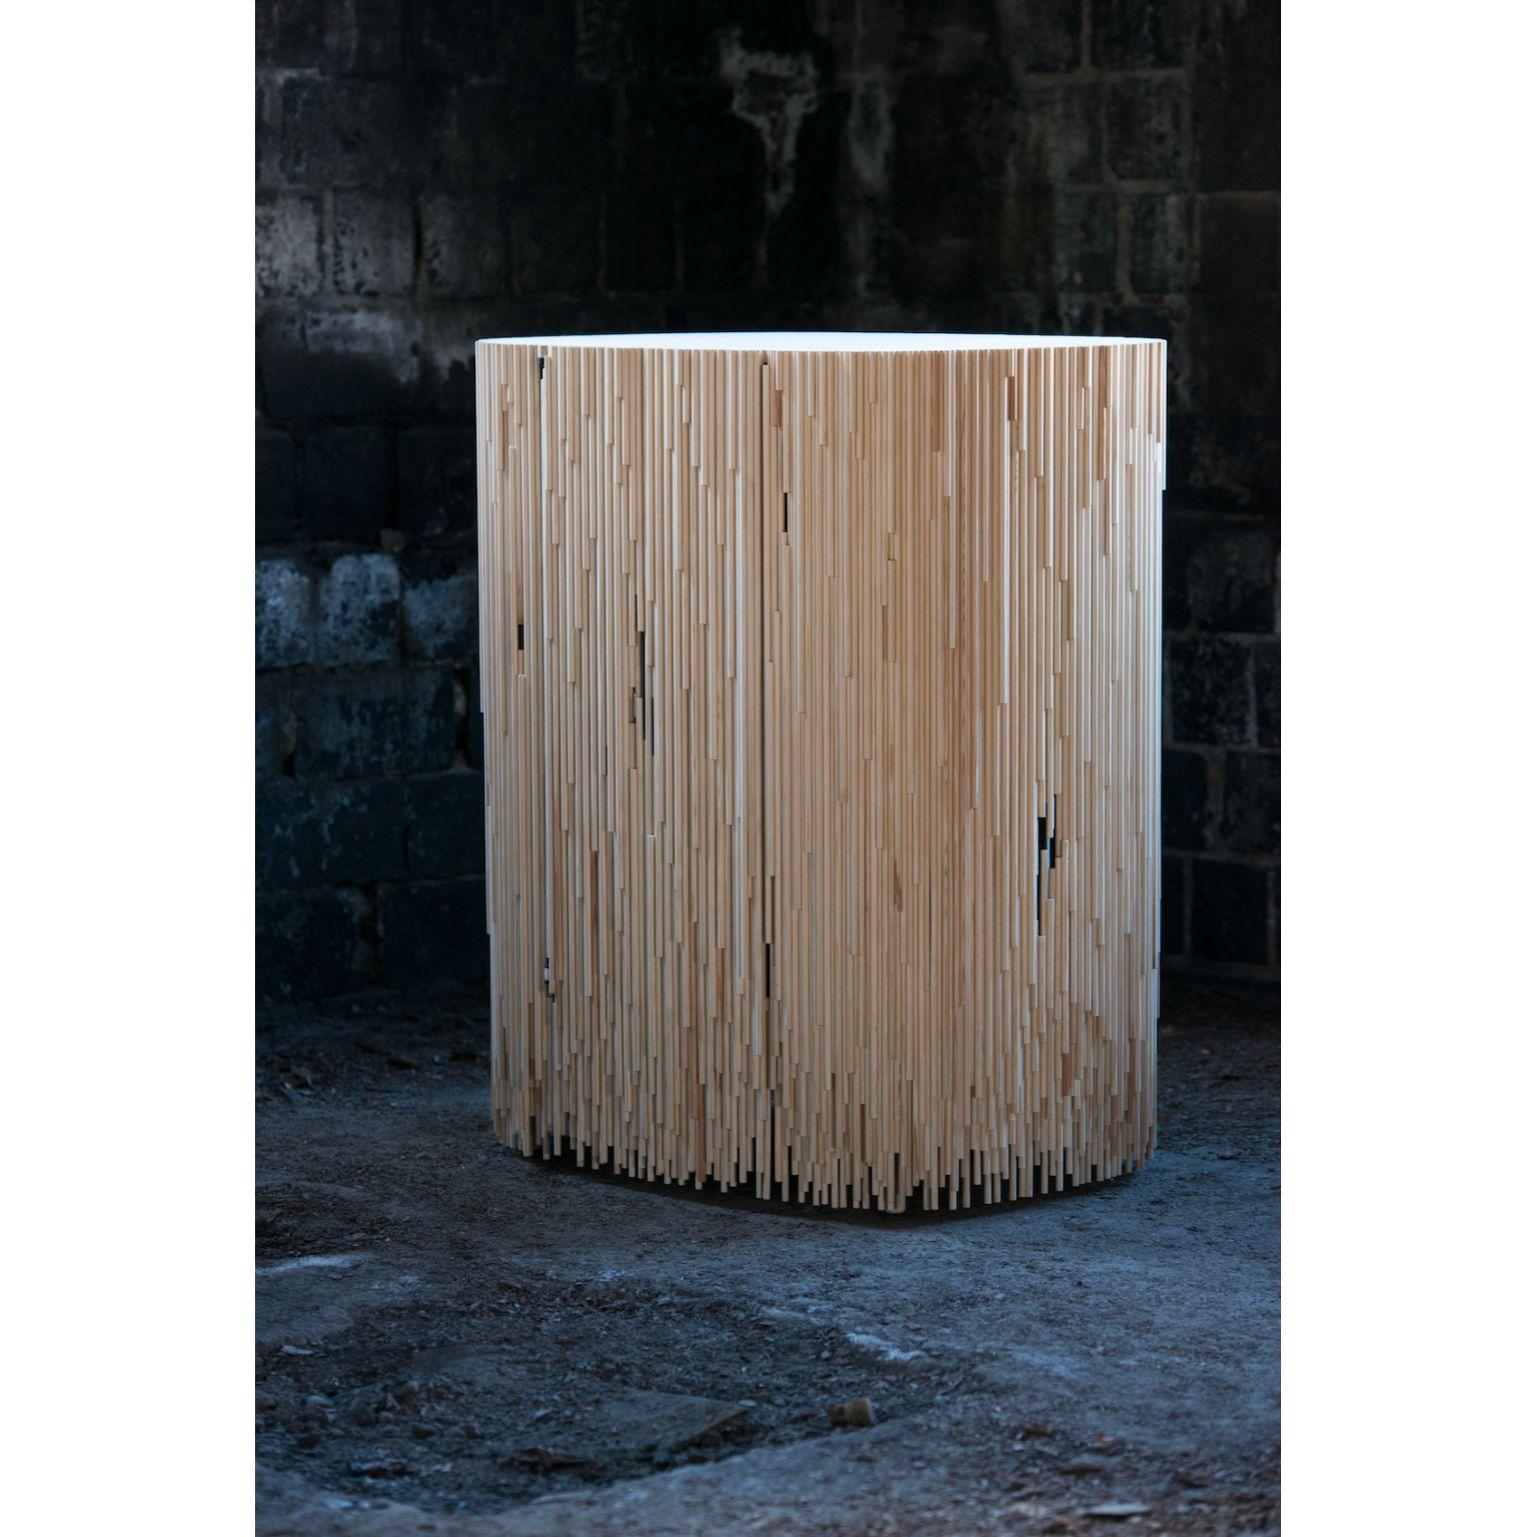 Melt cabinet - small by Antrei Hartikainen
Materials: Stained and lacquered or untreated pine
Dimensions: W 80 x D 60 x H 100 cm

In the melt cabinets industrially treated pine transforms into an unique art composition. The cabinet has been